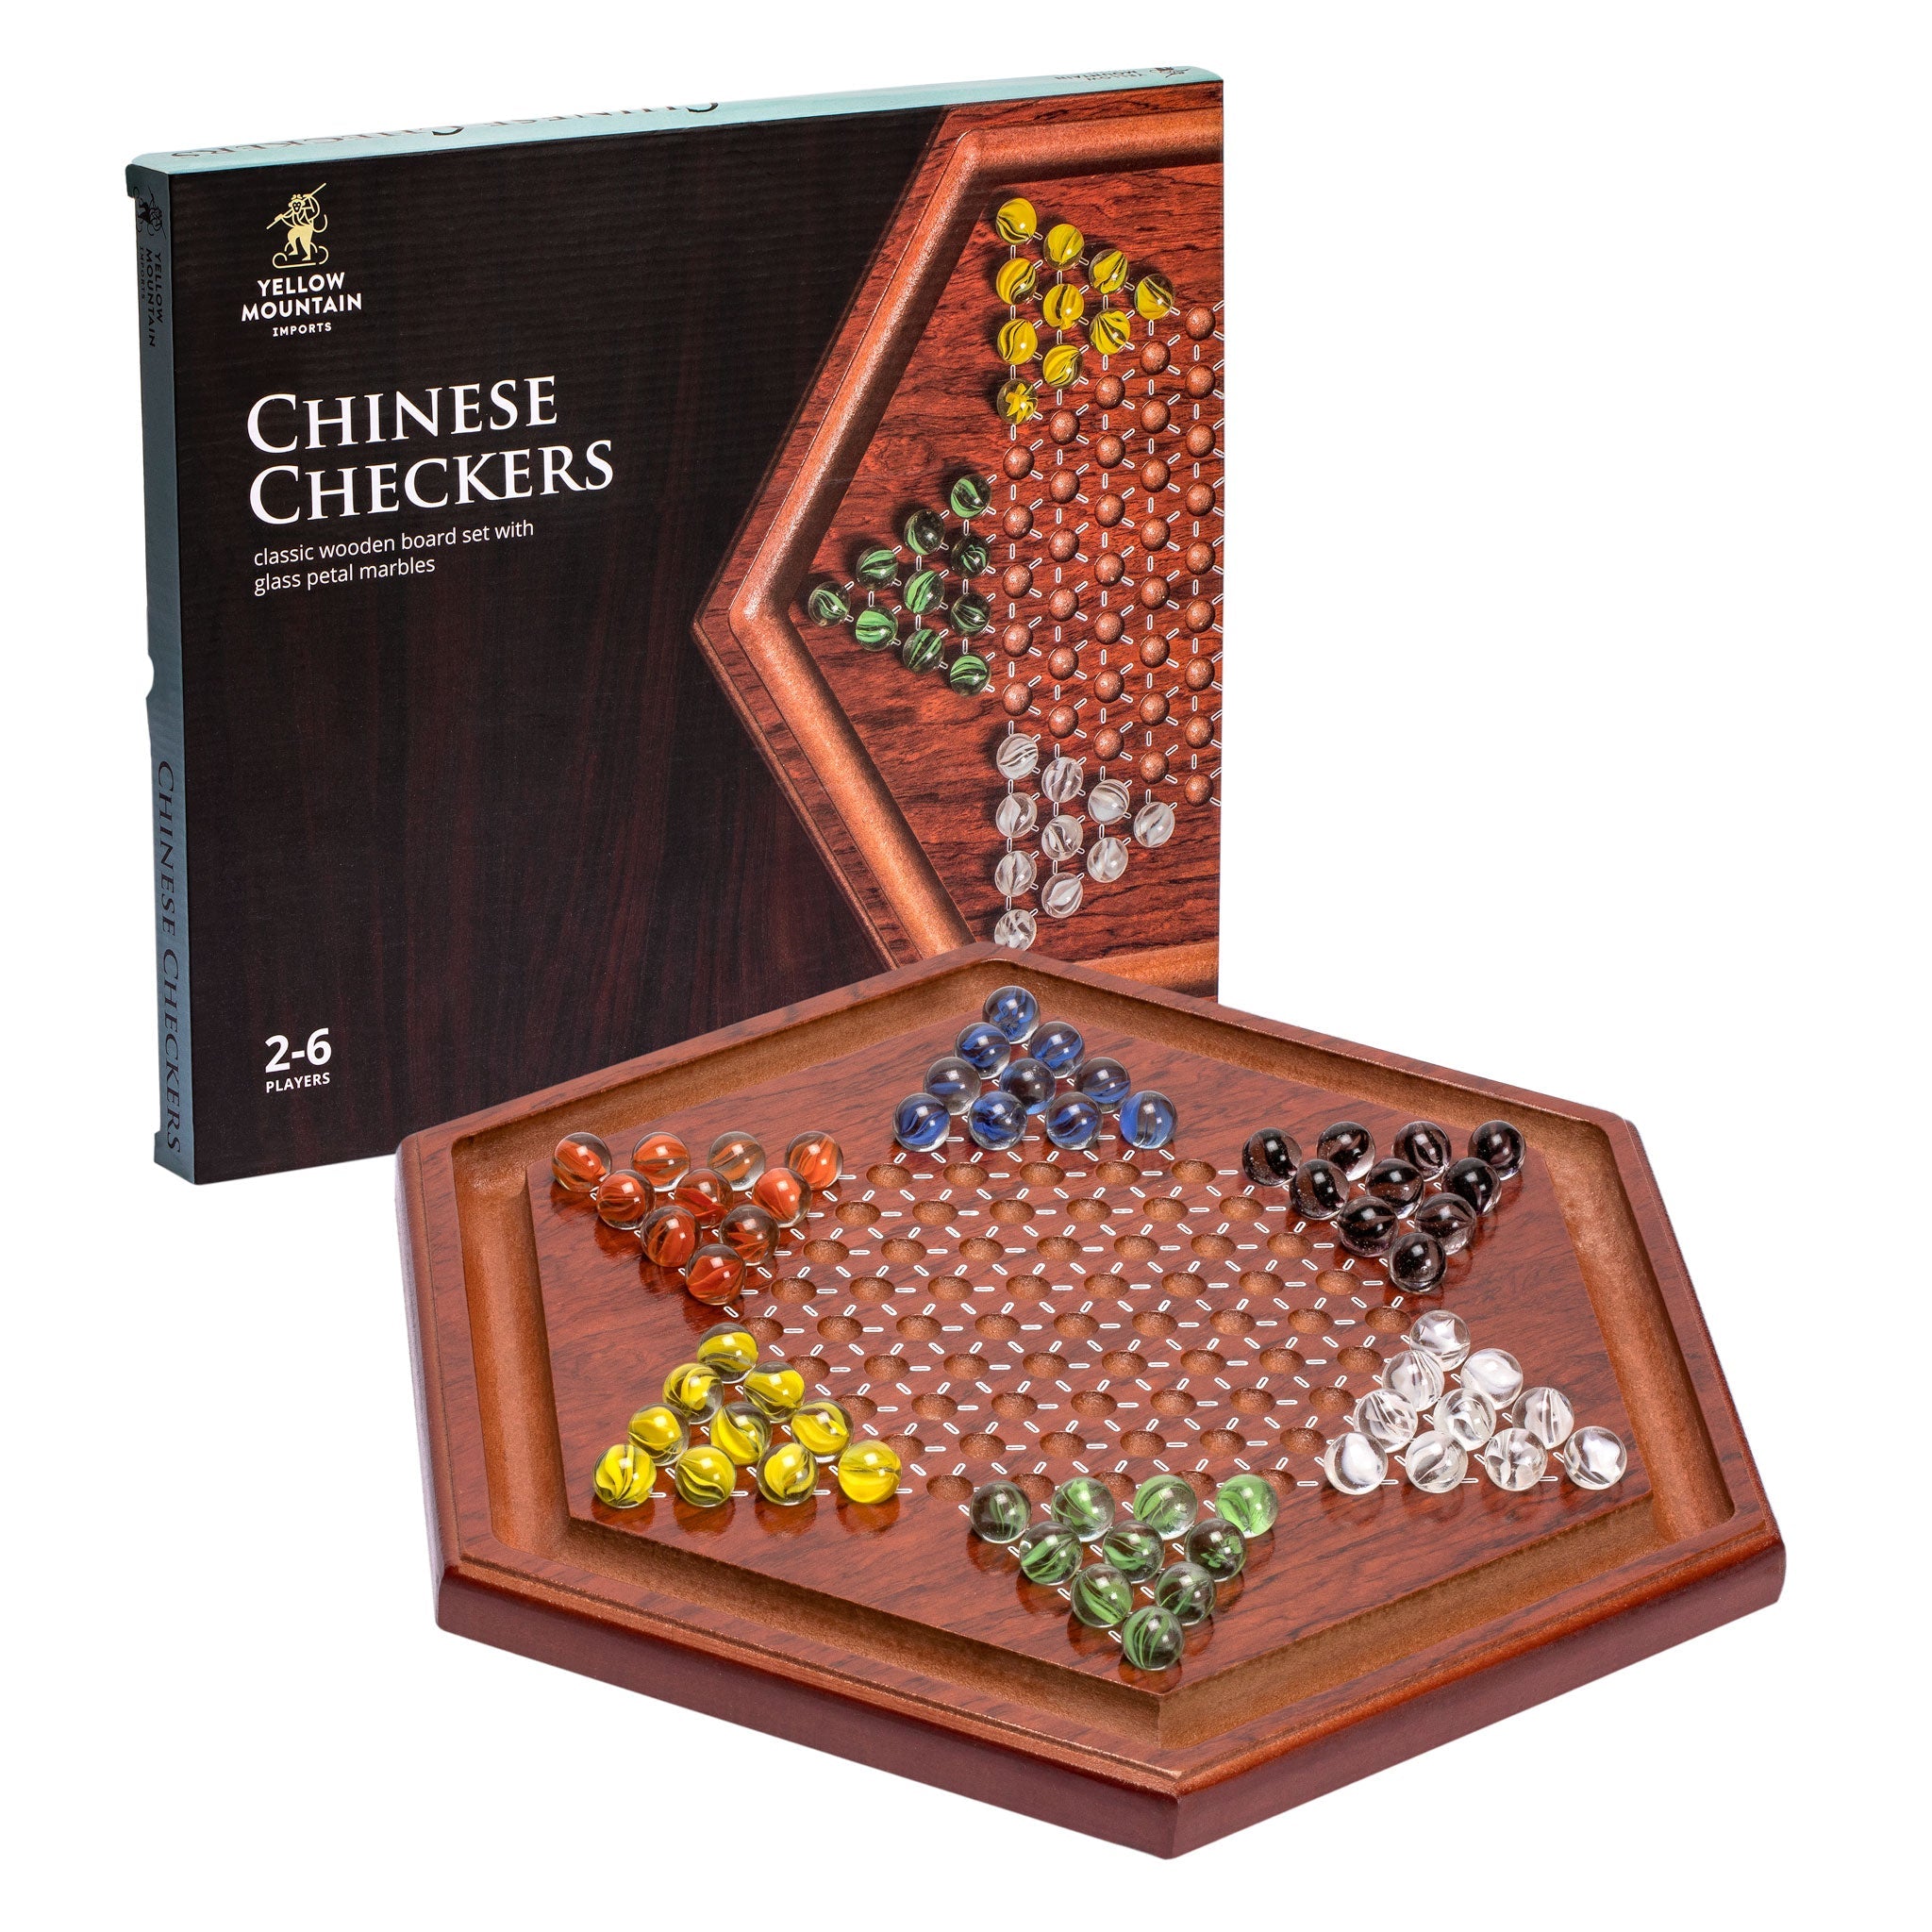 House Of Marbles 2 Player Chess